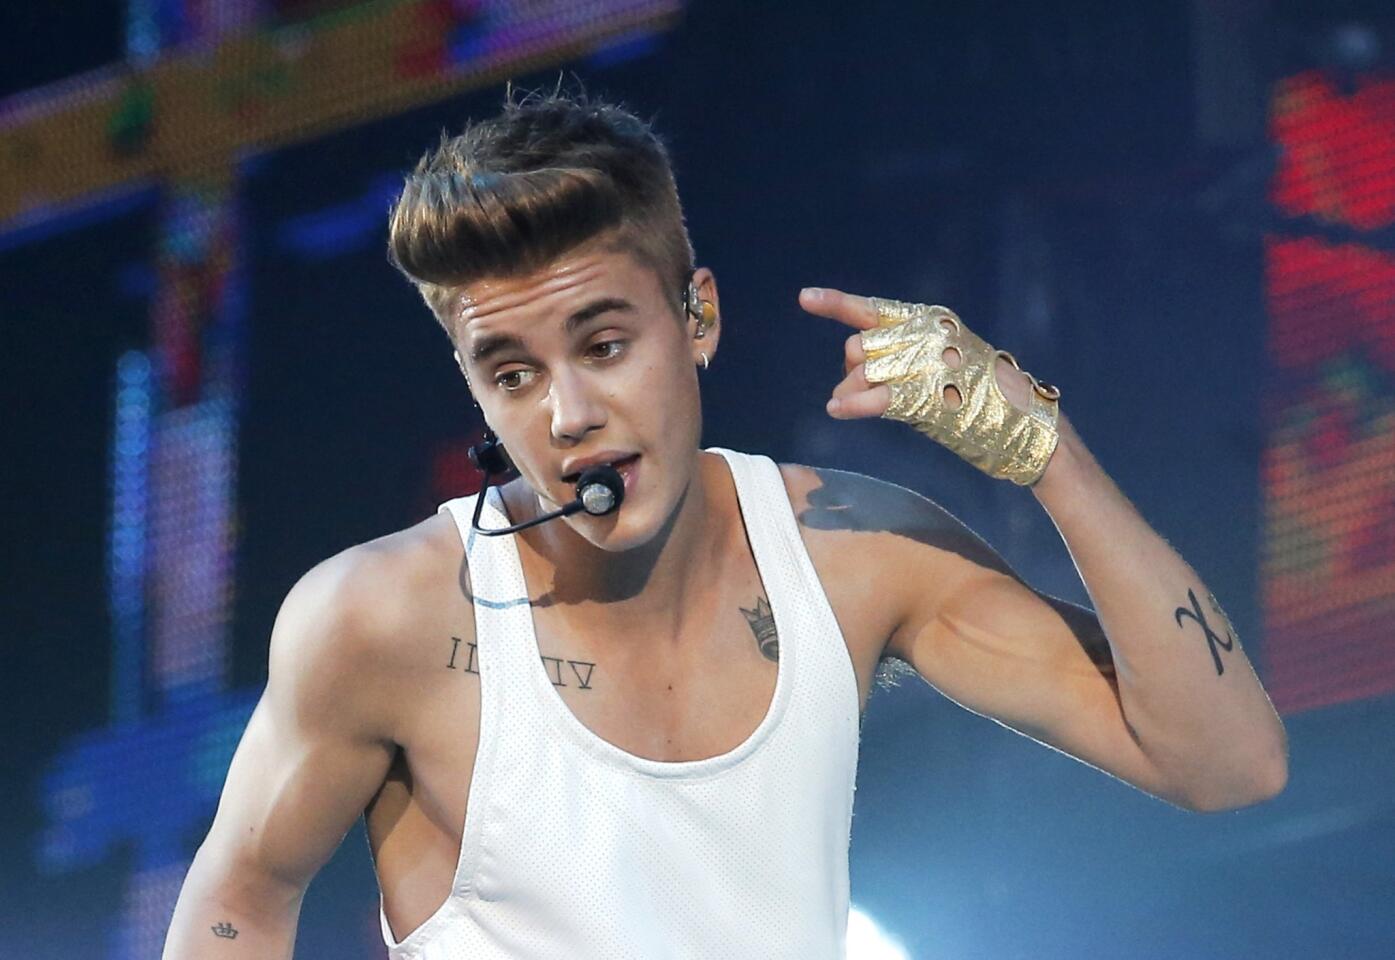 Justin Bieber denies attempted-robbery accusation